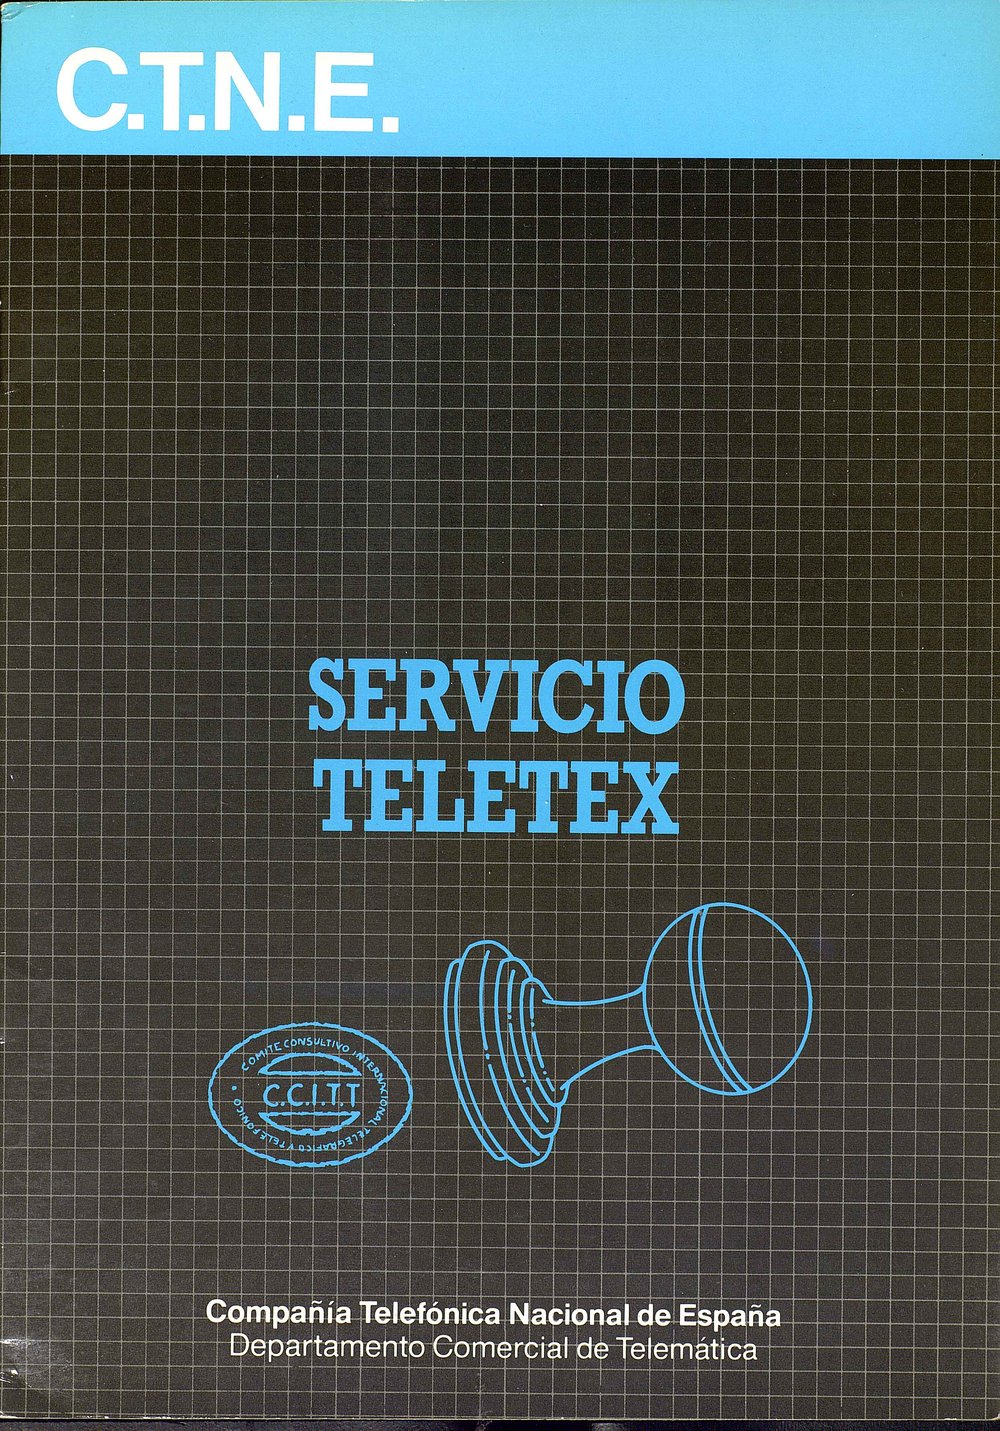 TELETEX SERVICE: A NEW TELECOMMUNICATION SERVICE FOR THE TRANSMISSION OF TEXTS